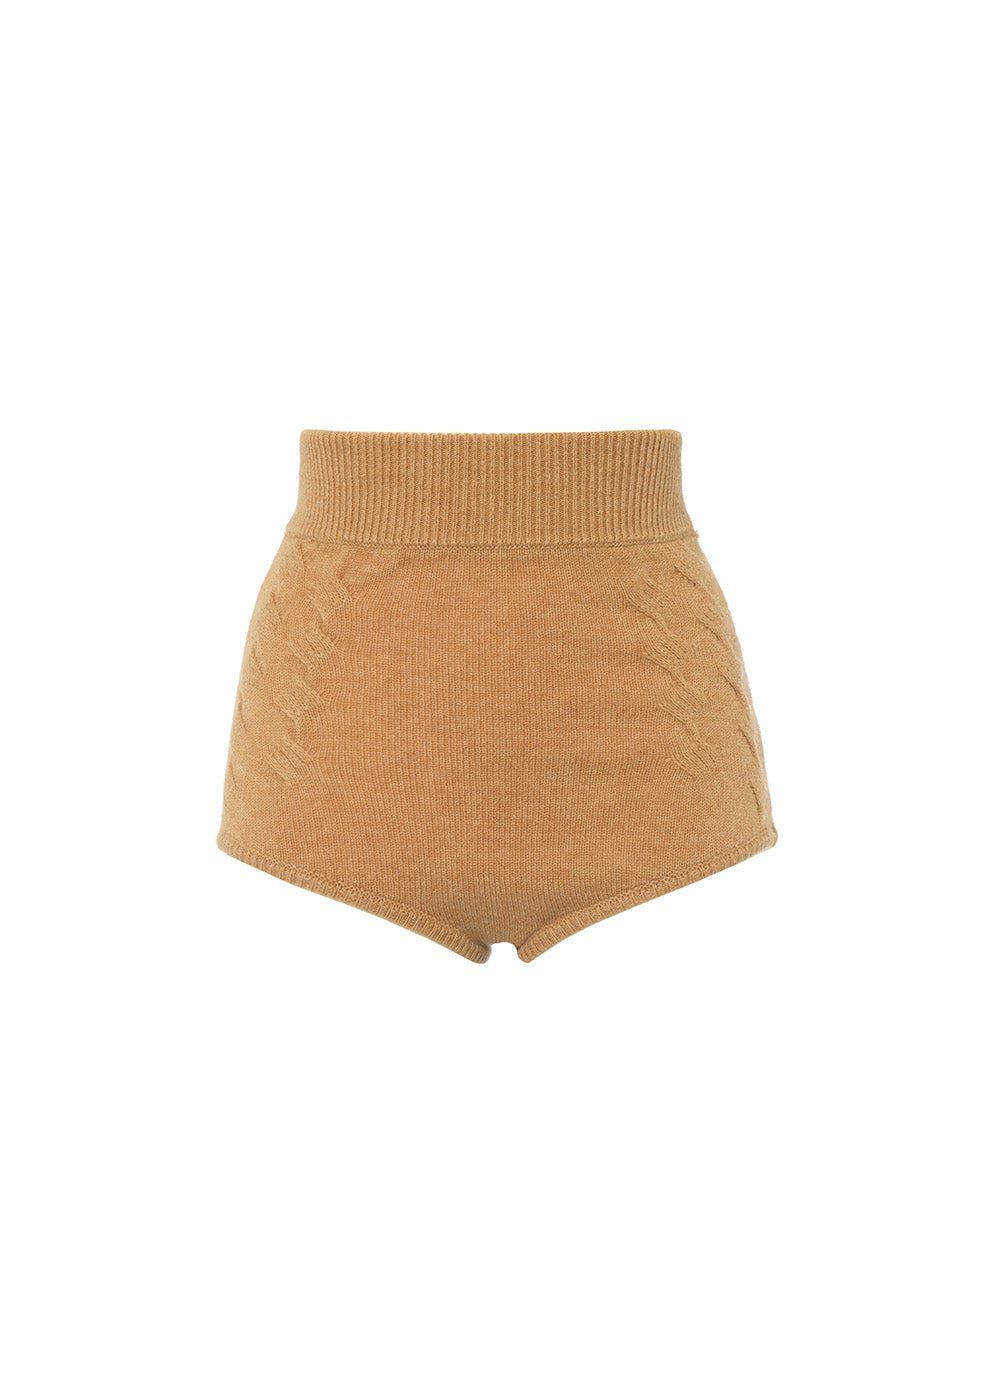 Mimie Knitted Knickers - One Size / Camel